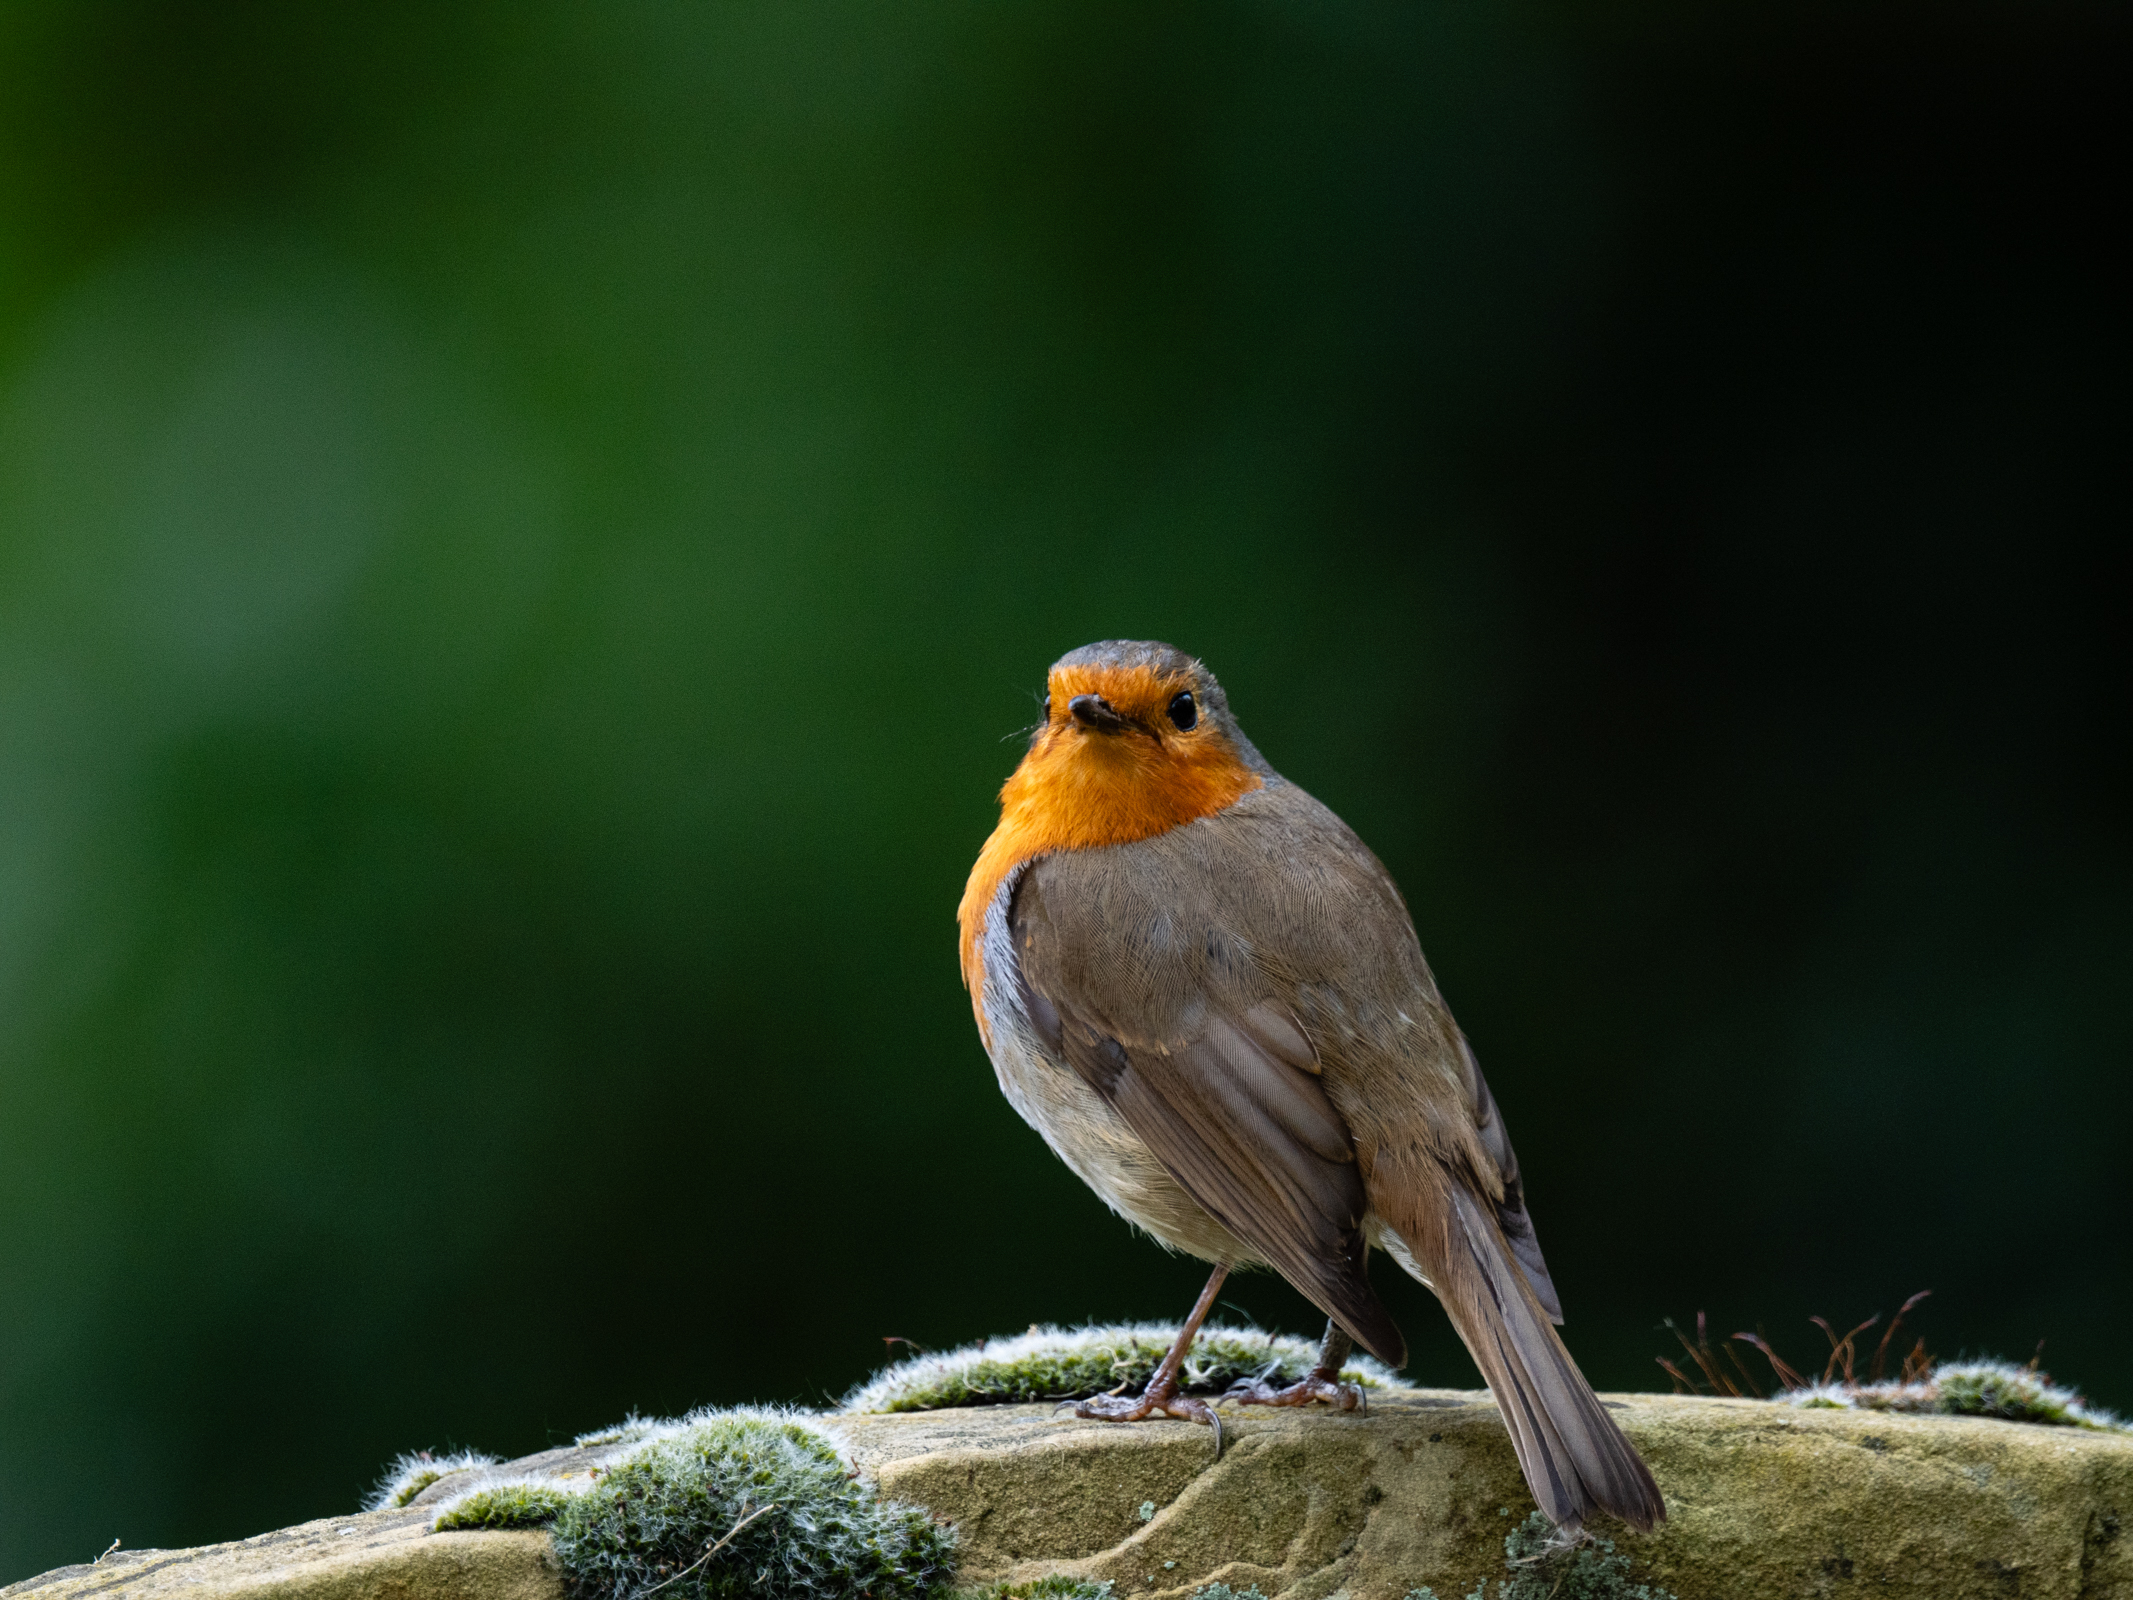 Photo of a robin taken with the OM System M.Zuiko Digital 150-600mm F5.0-6.3 IS